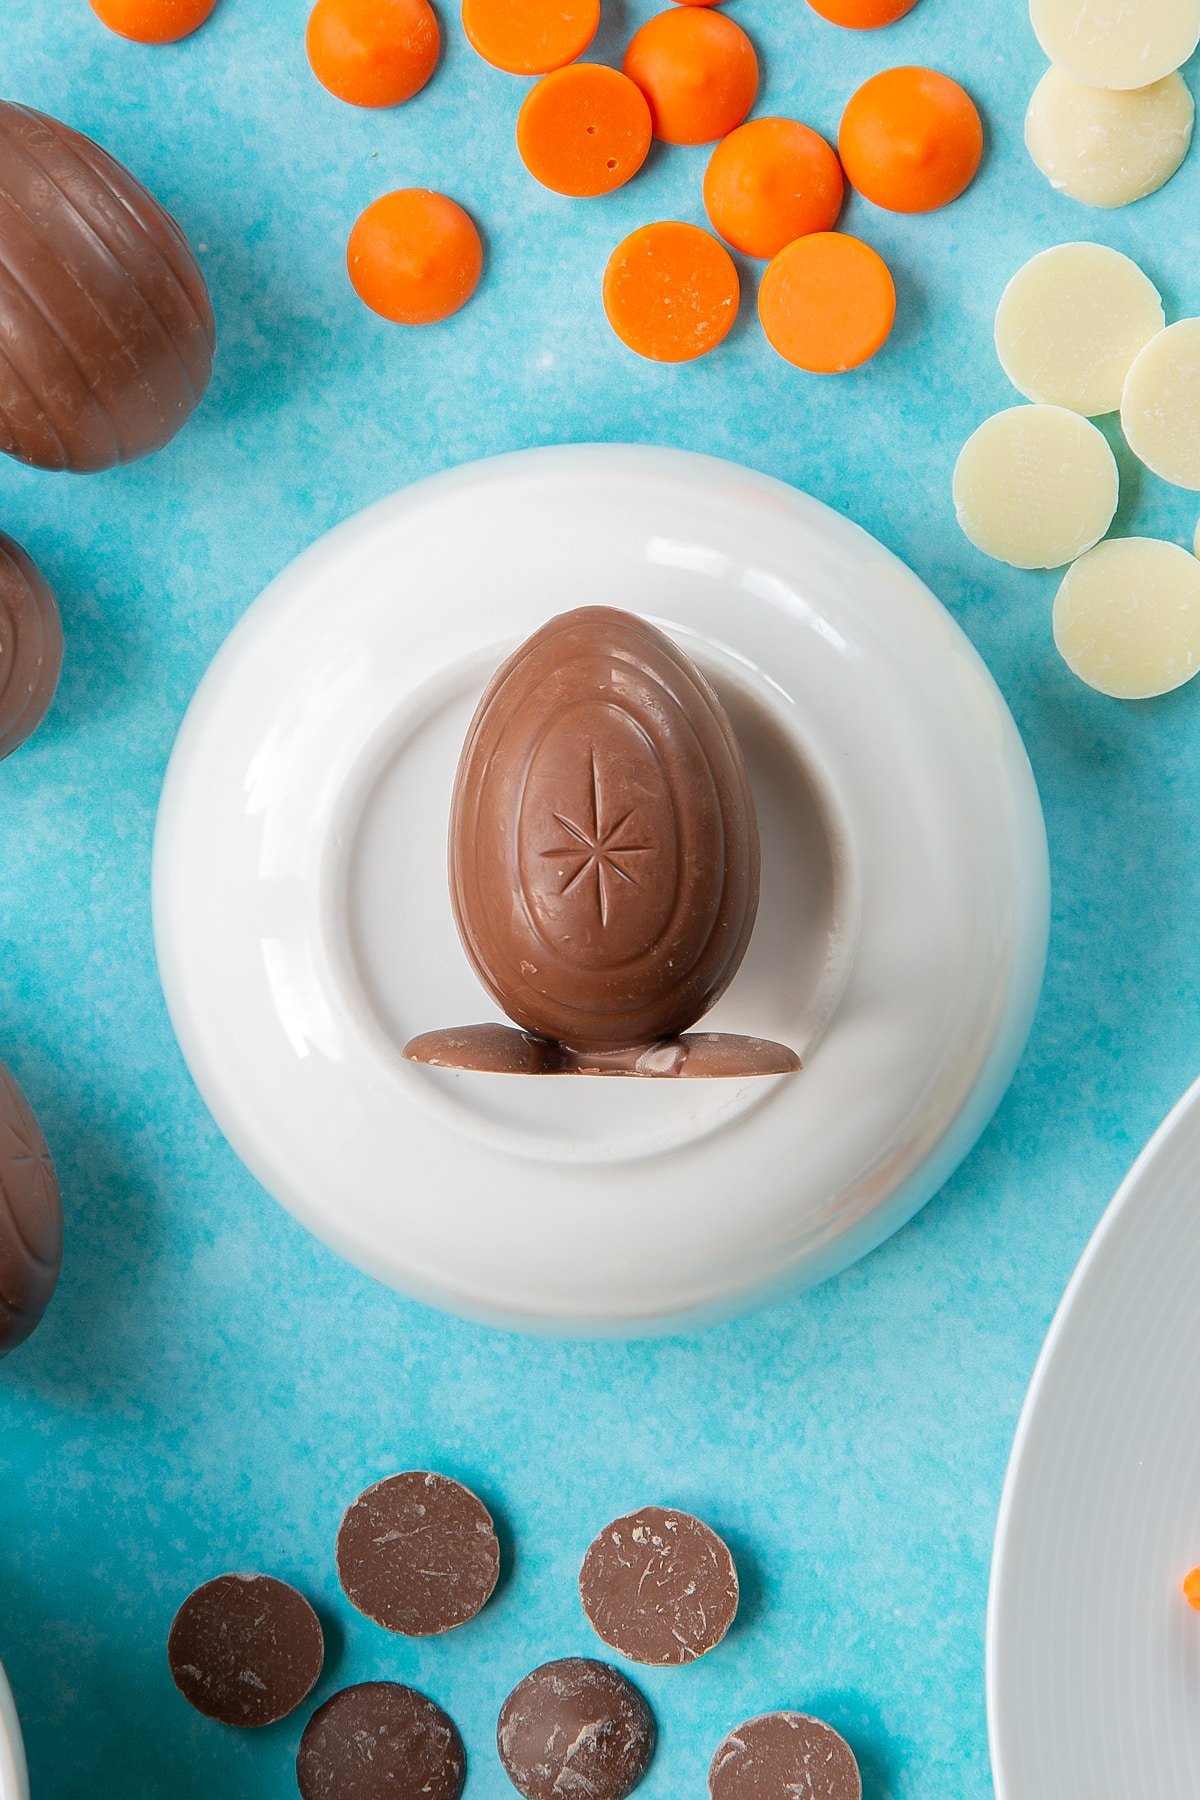 Two chocolate buttons stuck to the bottom of a creme egg to resemble feet. The egg lays on an upturned white bowl, surrounded by ingredients to make chocolate chicks.